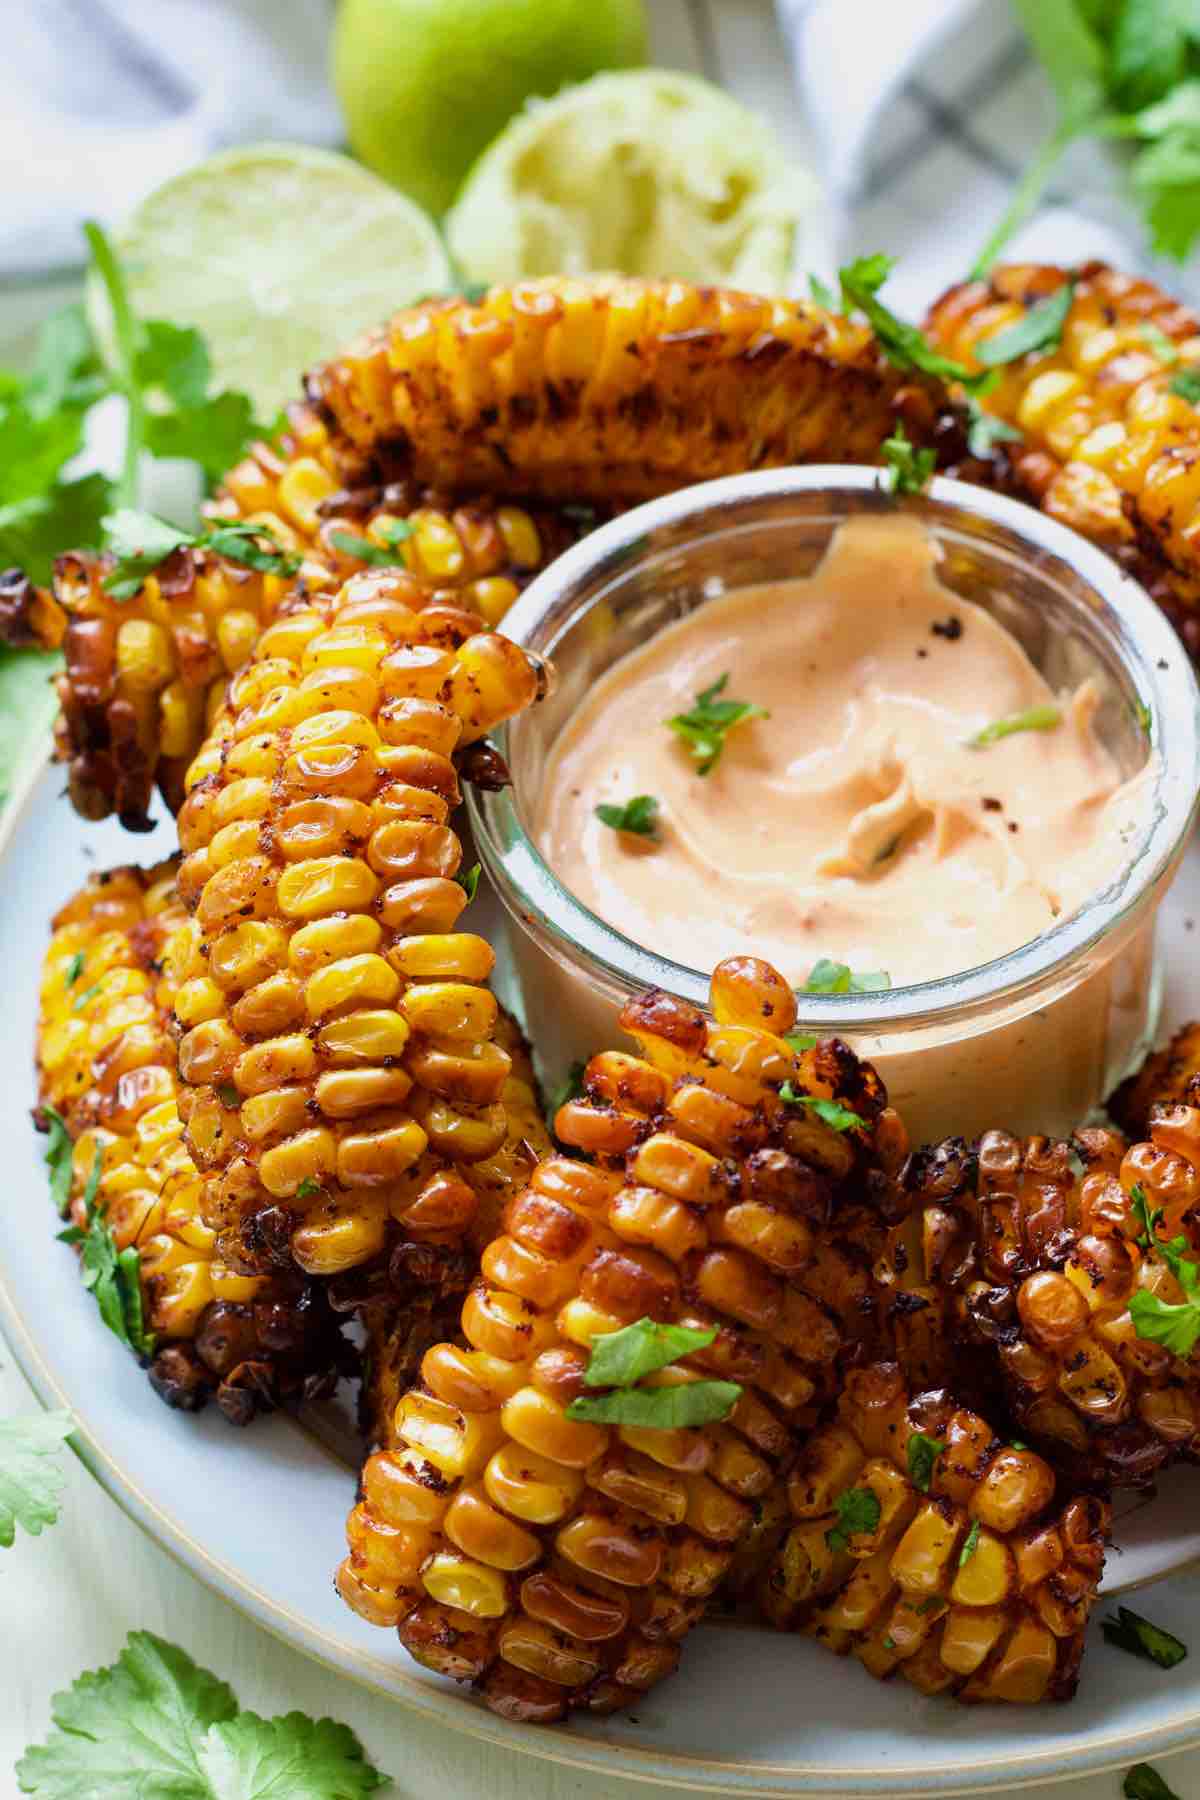 Corn giblets arranged on a plate around bowl with a dip.